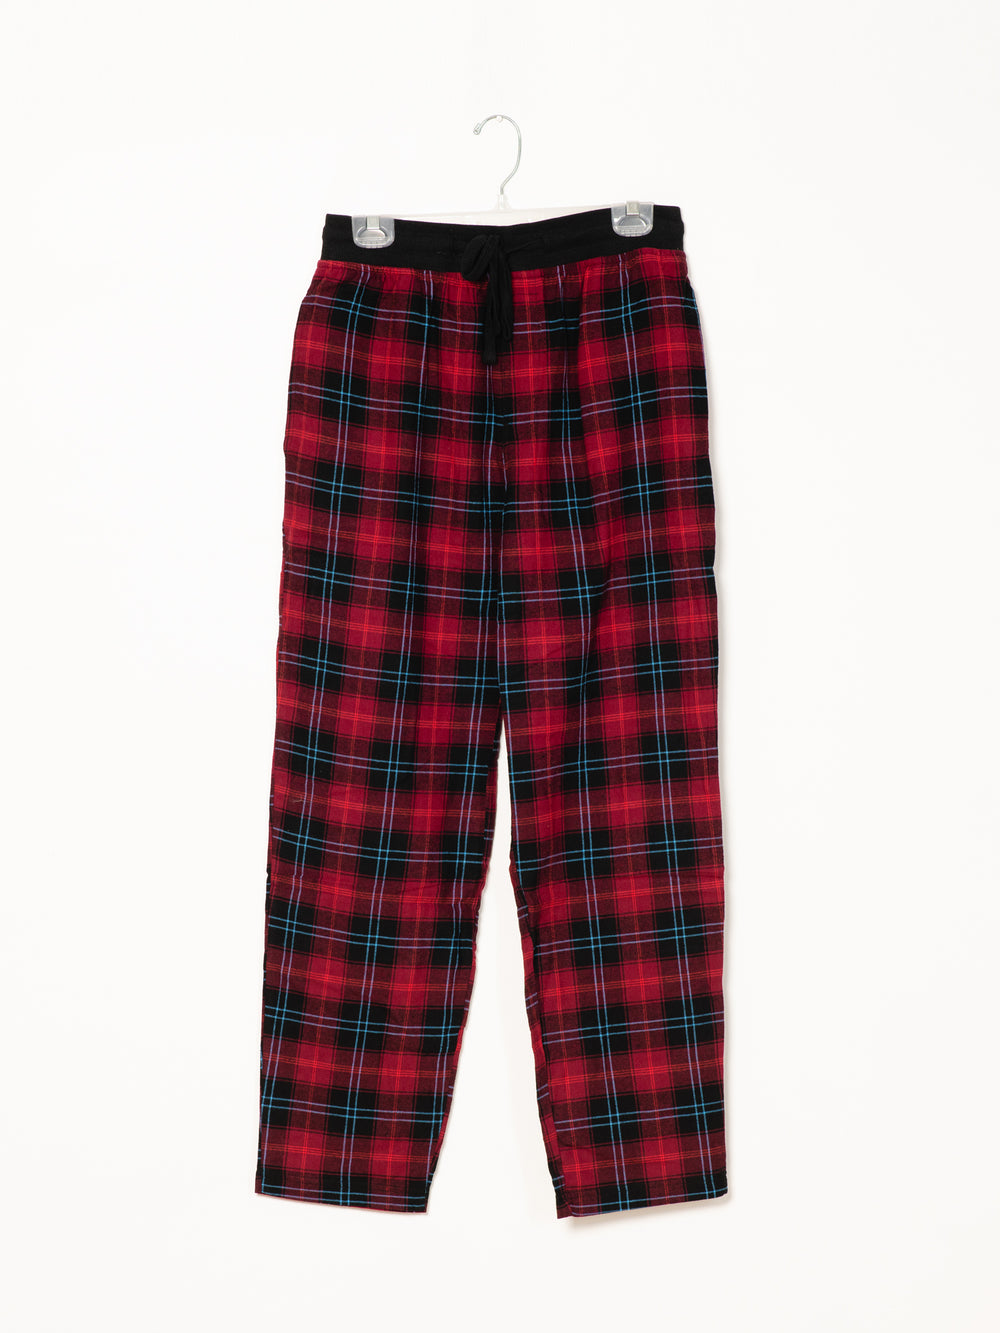 MENS WILSON PLAID PANT BF - CLEARANCE